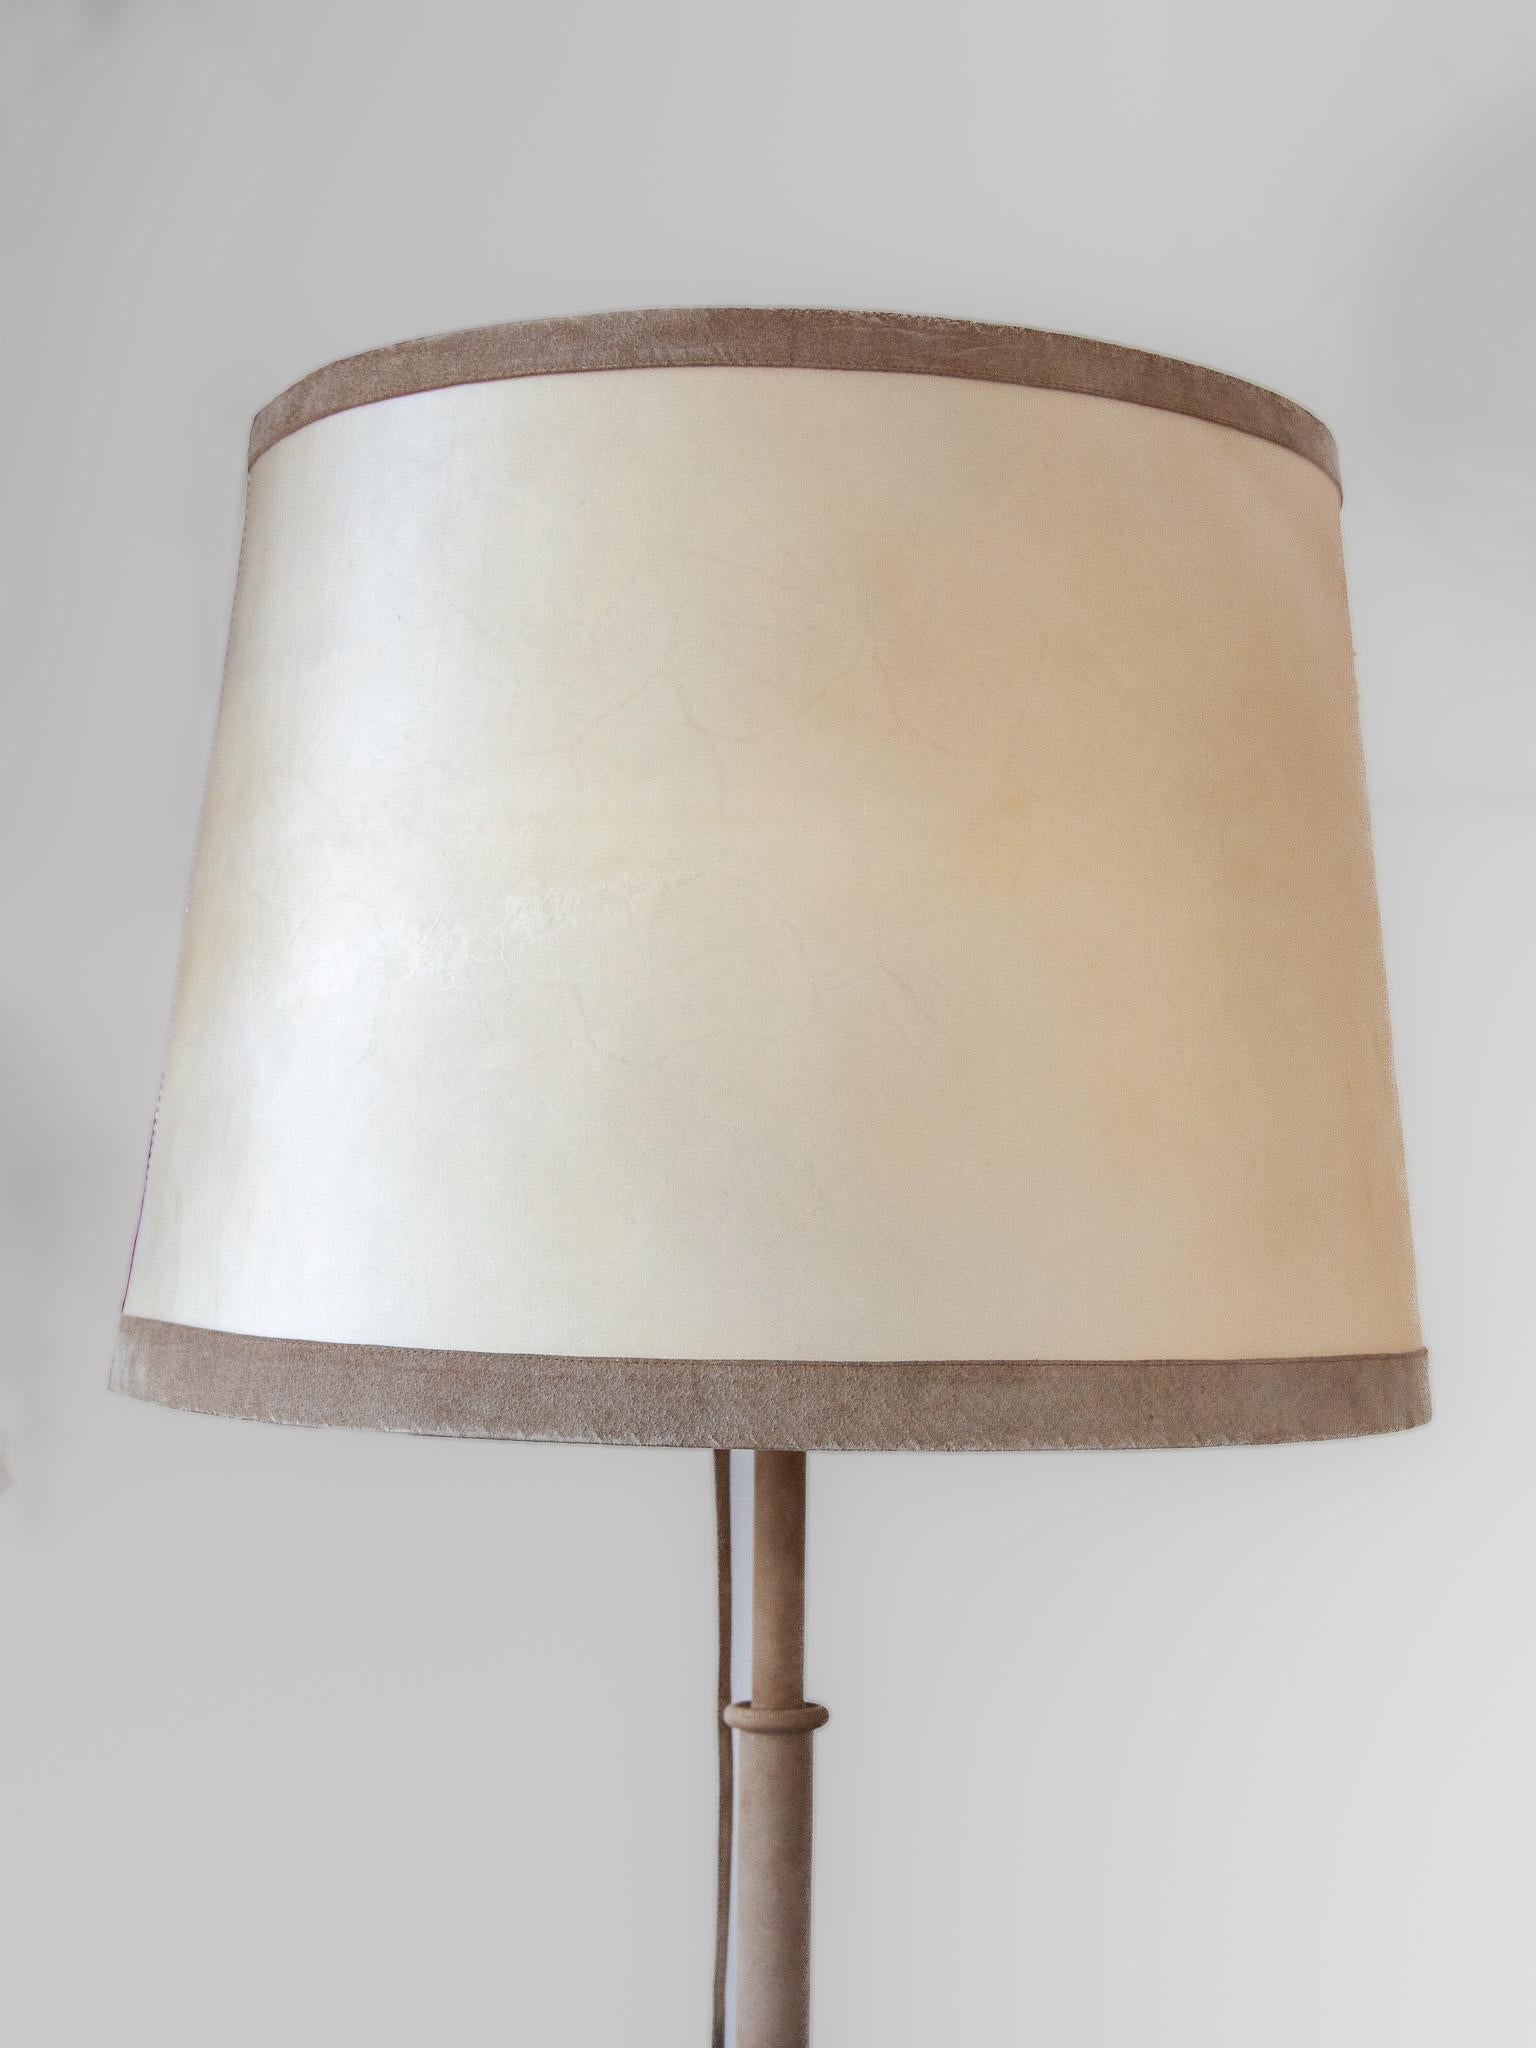 Designed by Charlotte Waver for living room lamps in Germany in the 80s. In a very good original condition.This lamp gives a soft light and a great atmosphere in your interior modern or cottage style. Very high quality leather floor lamp with goat